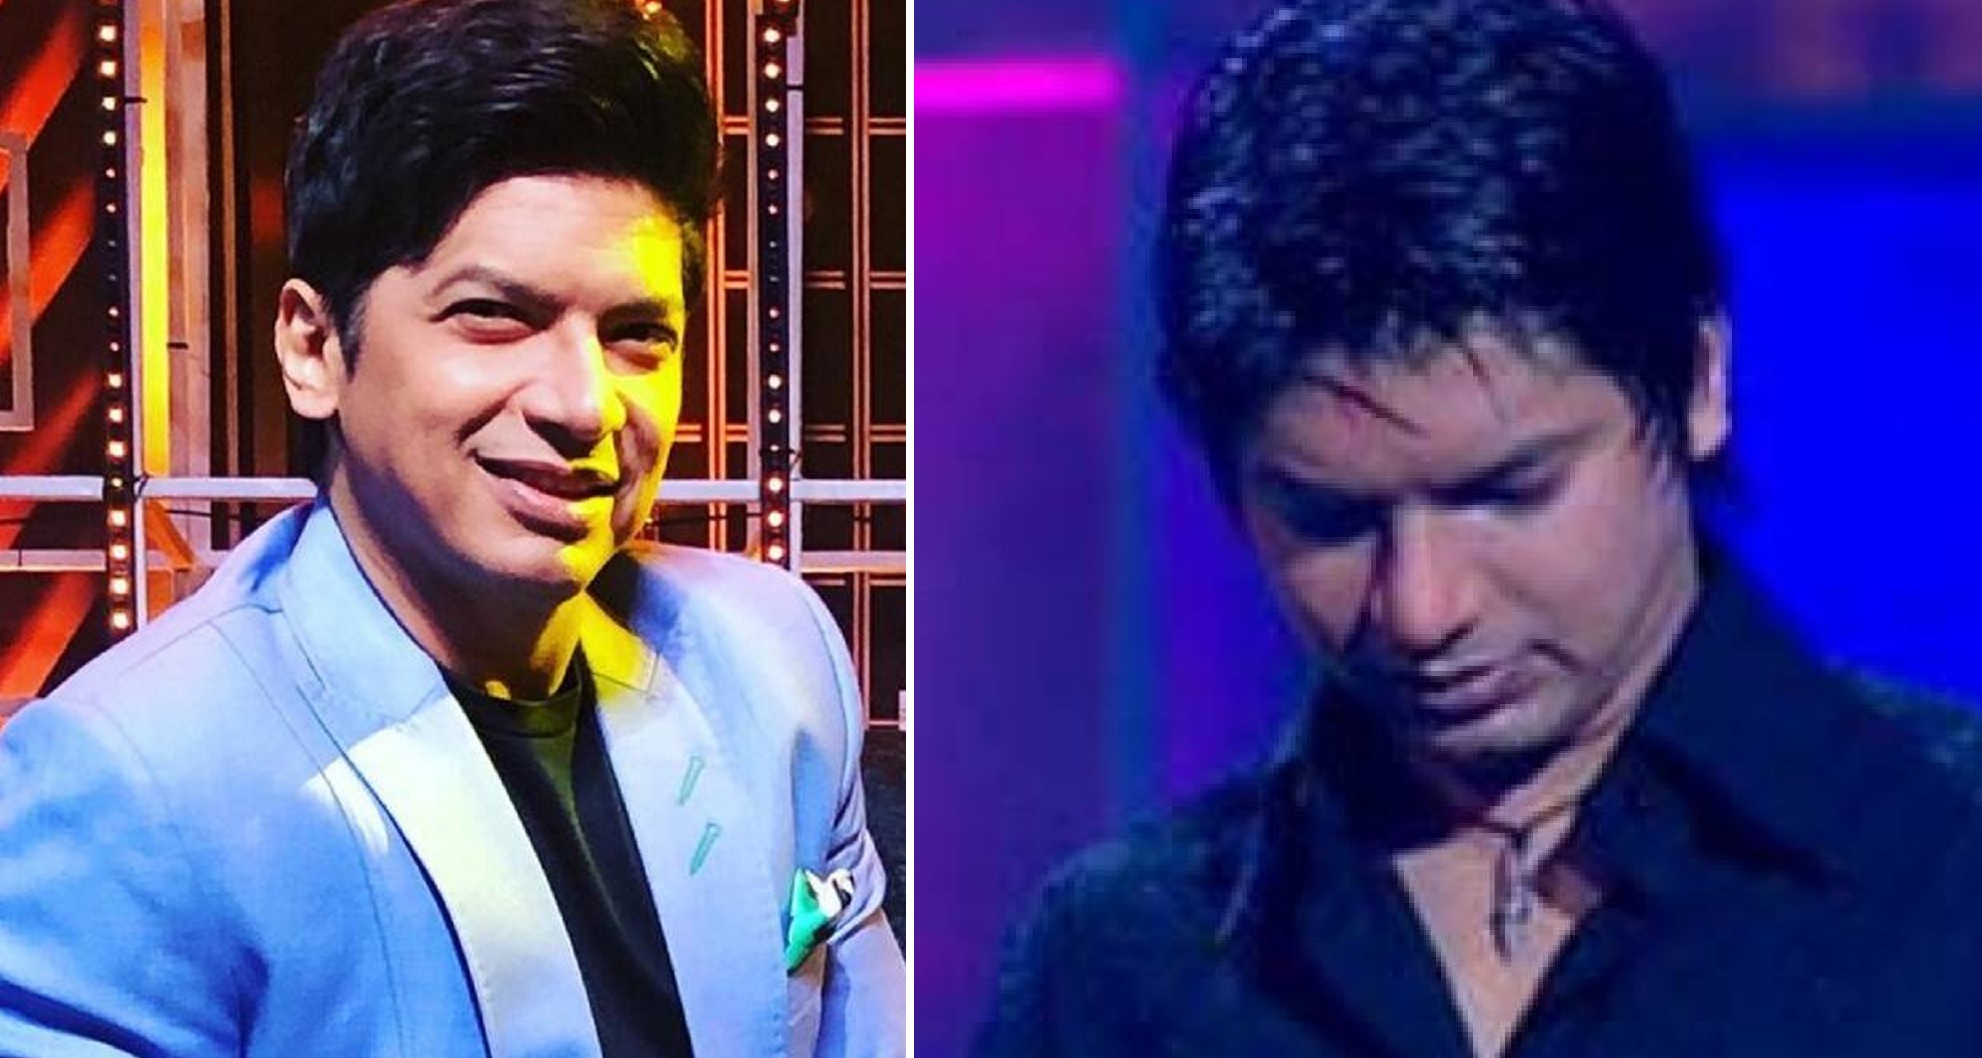 Singer Shaan Left “In Tears” After Receiving Least Votes For ‘Best Playback Male’ Award In FAFDA 2021